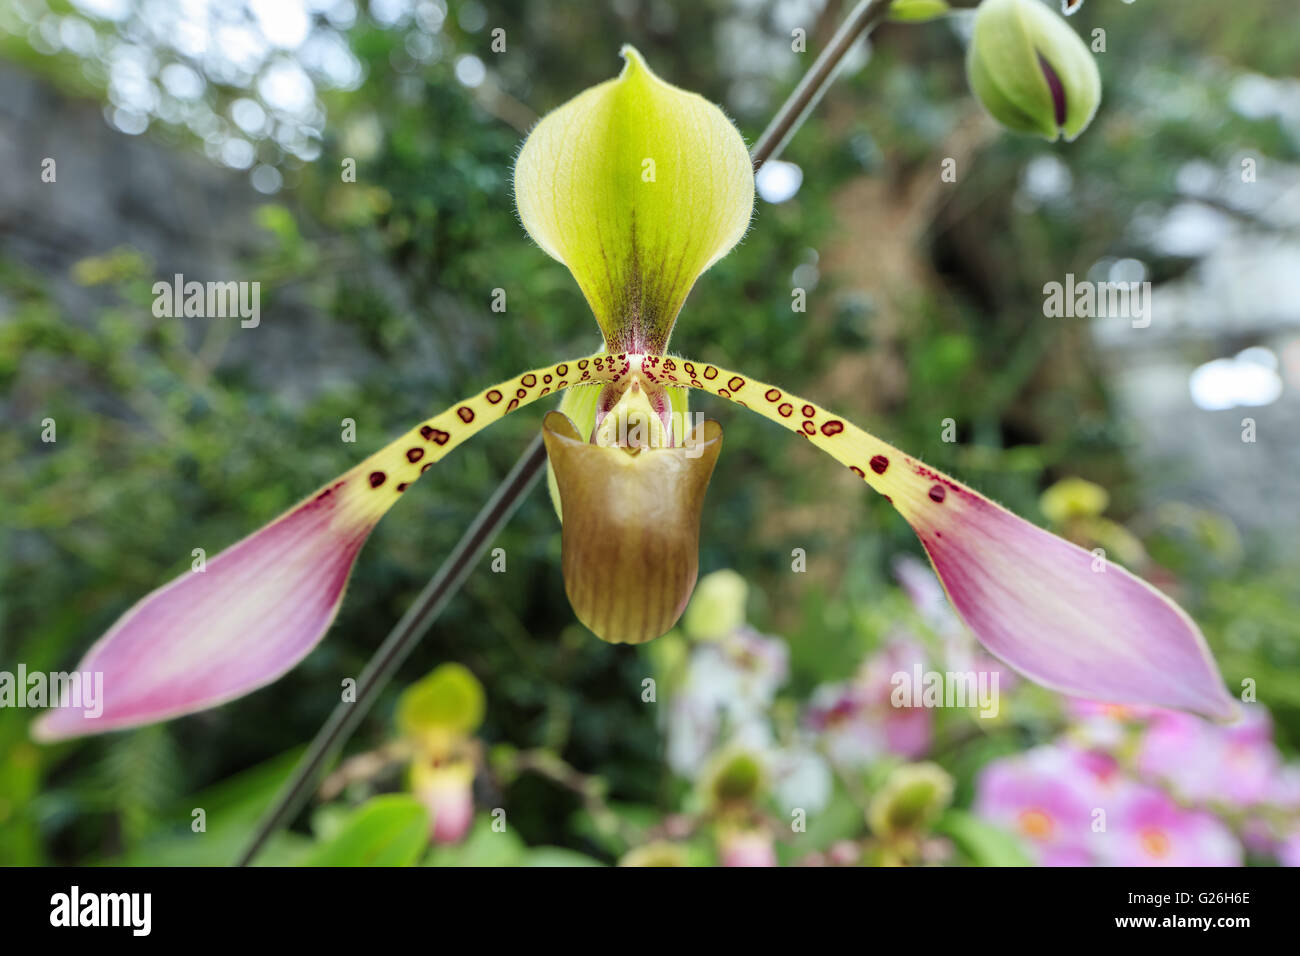 Amazing Paphiopedilum orchid flower close-up on natural background. Shallow depth of field Stock Photo